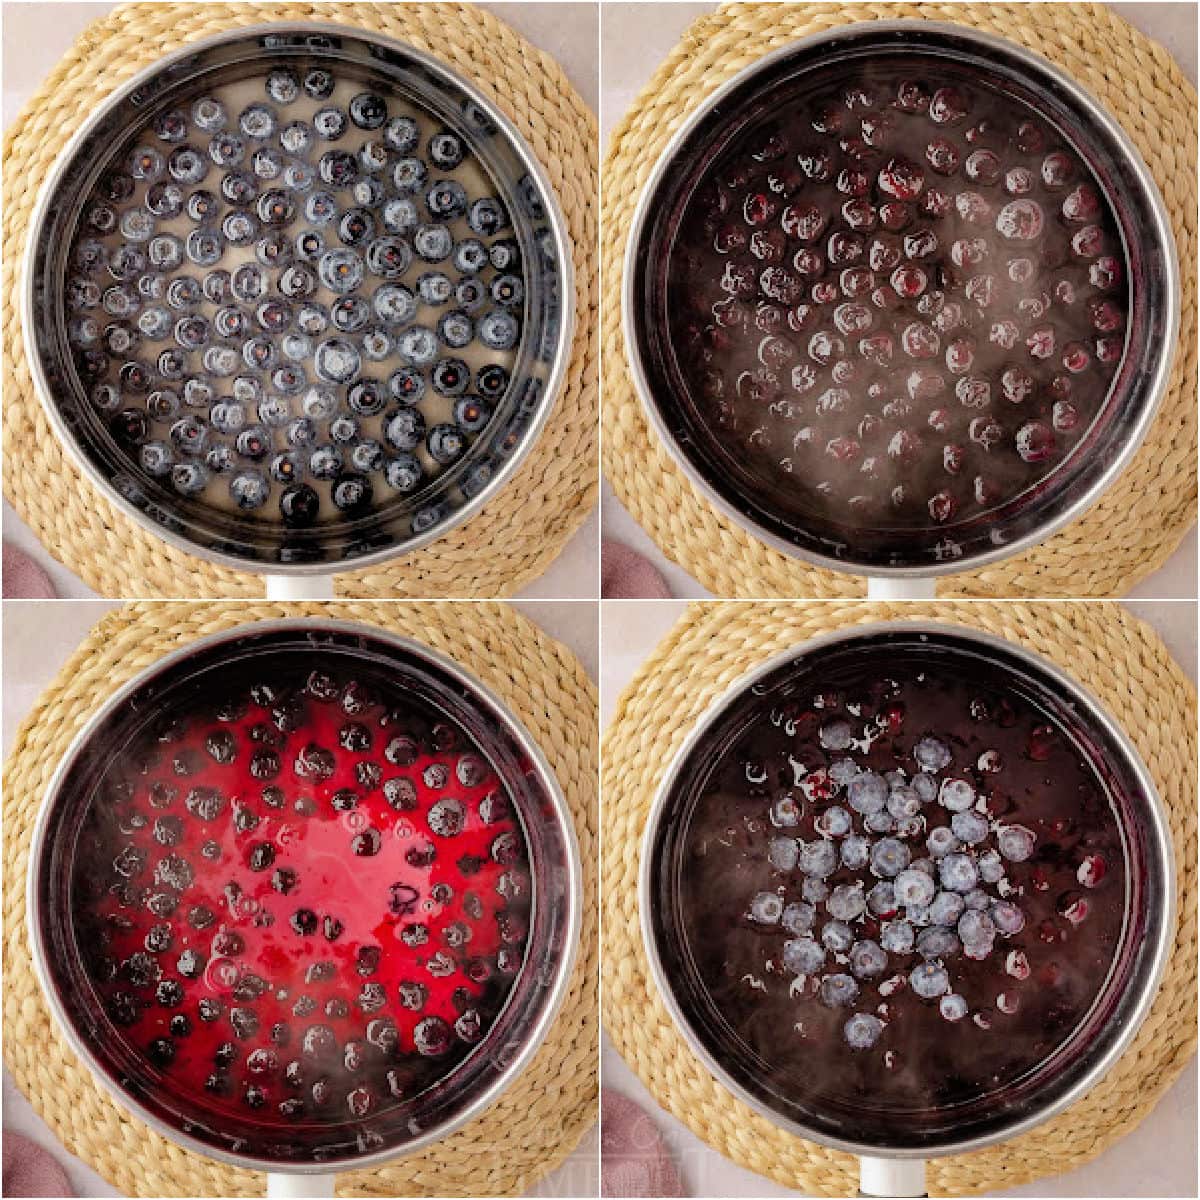 four image collage showing how to make blueberry sauce step by step.